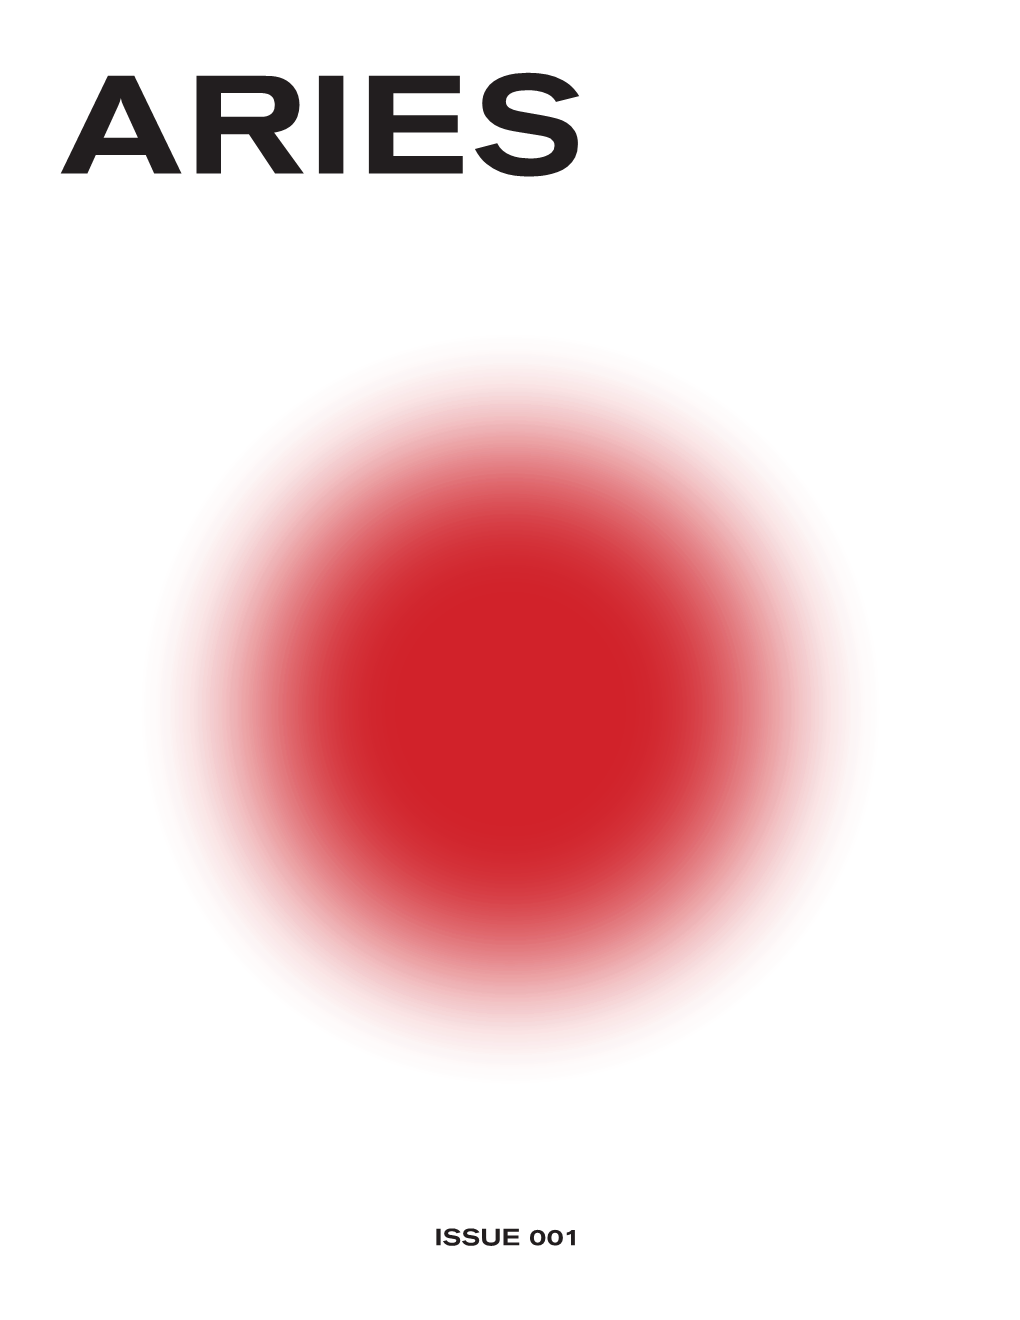 Issue 001 Aries Masthead Contents